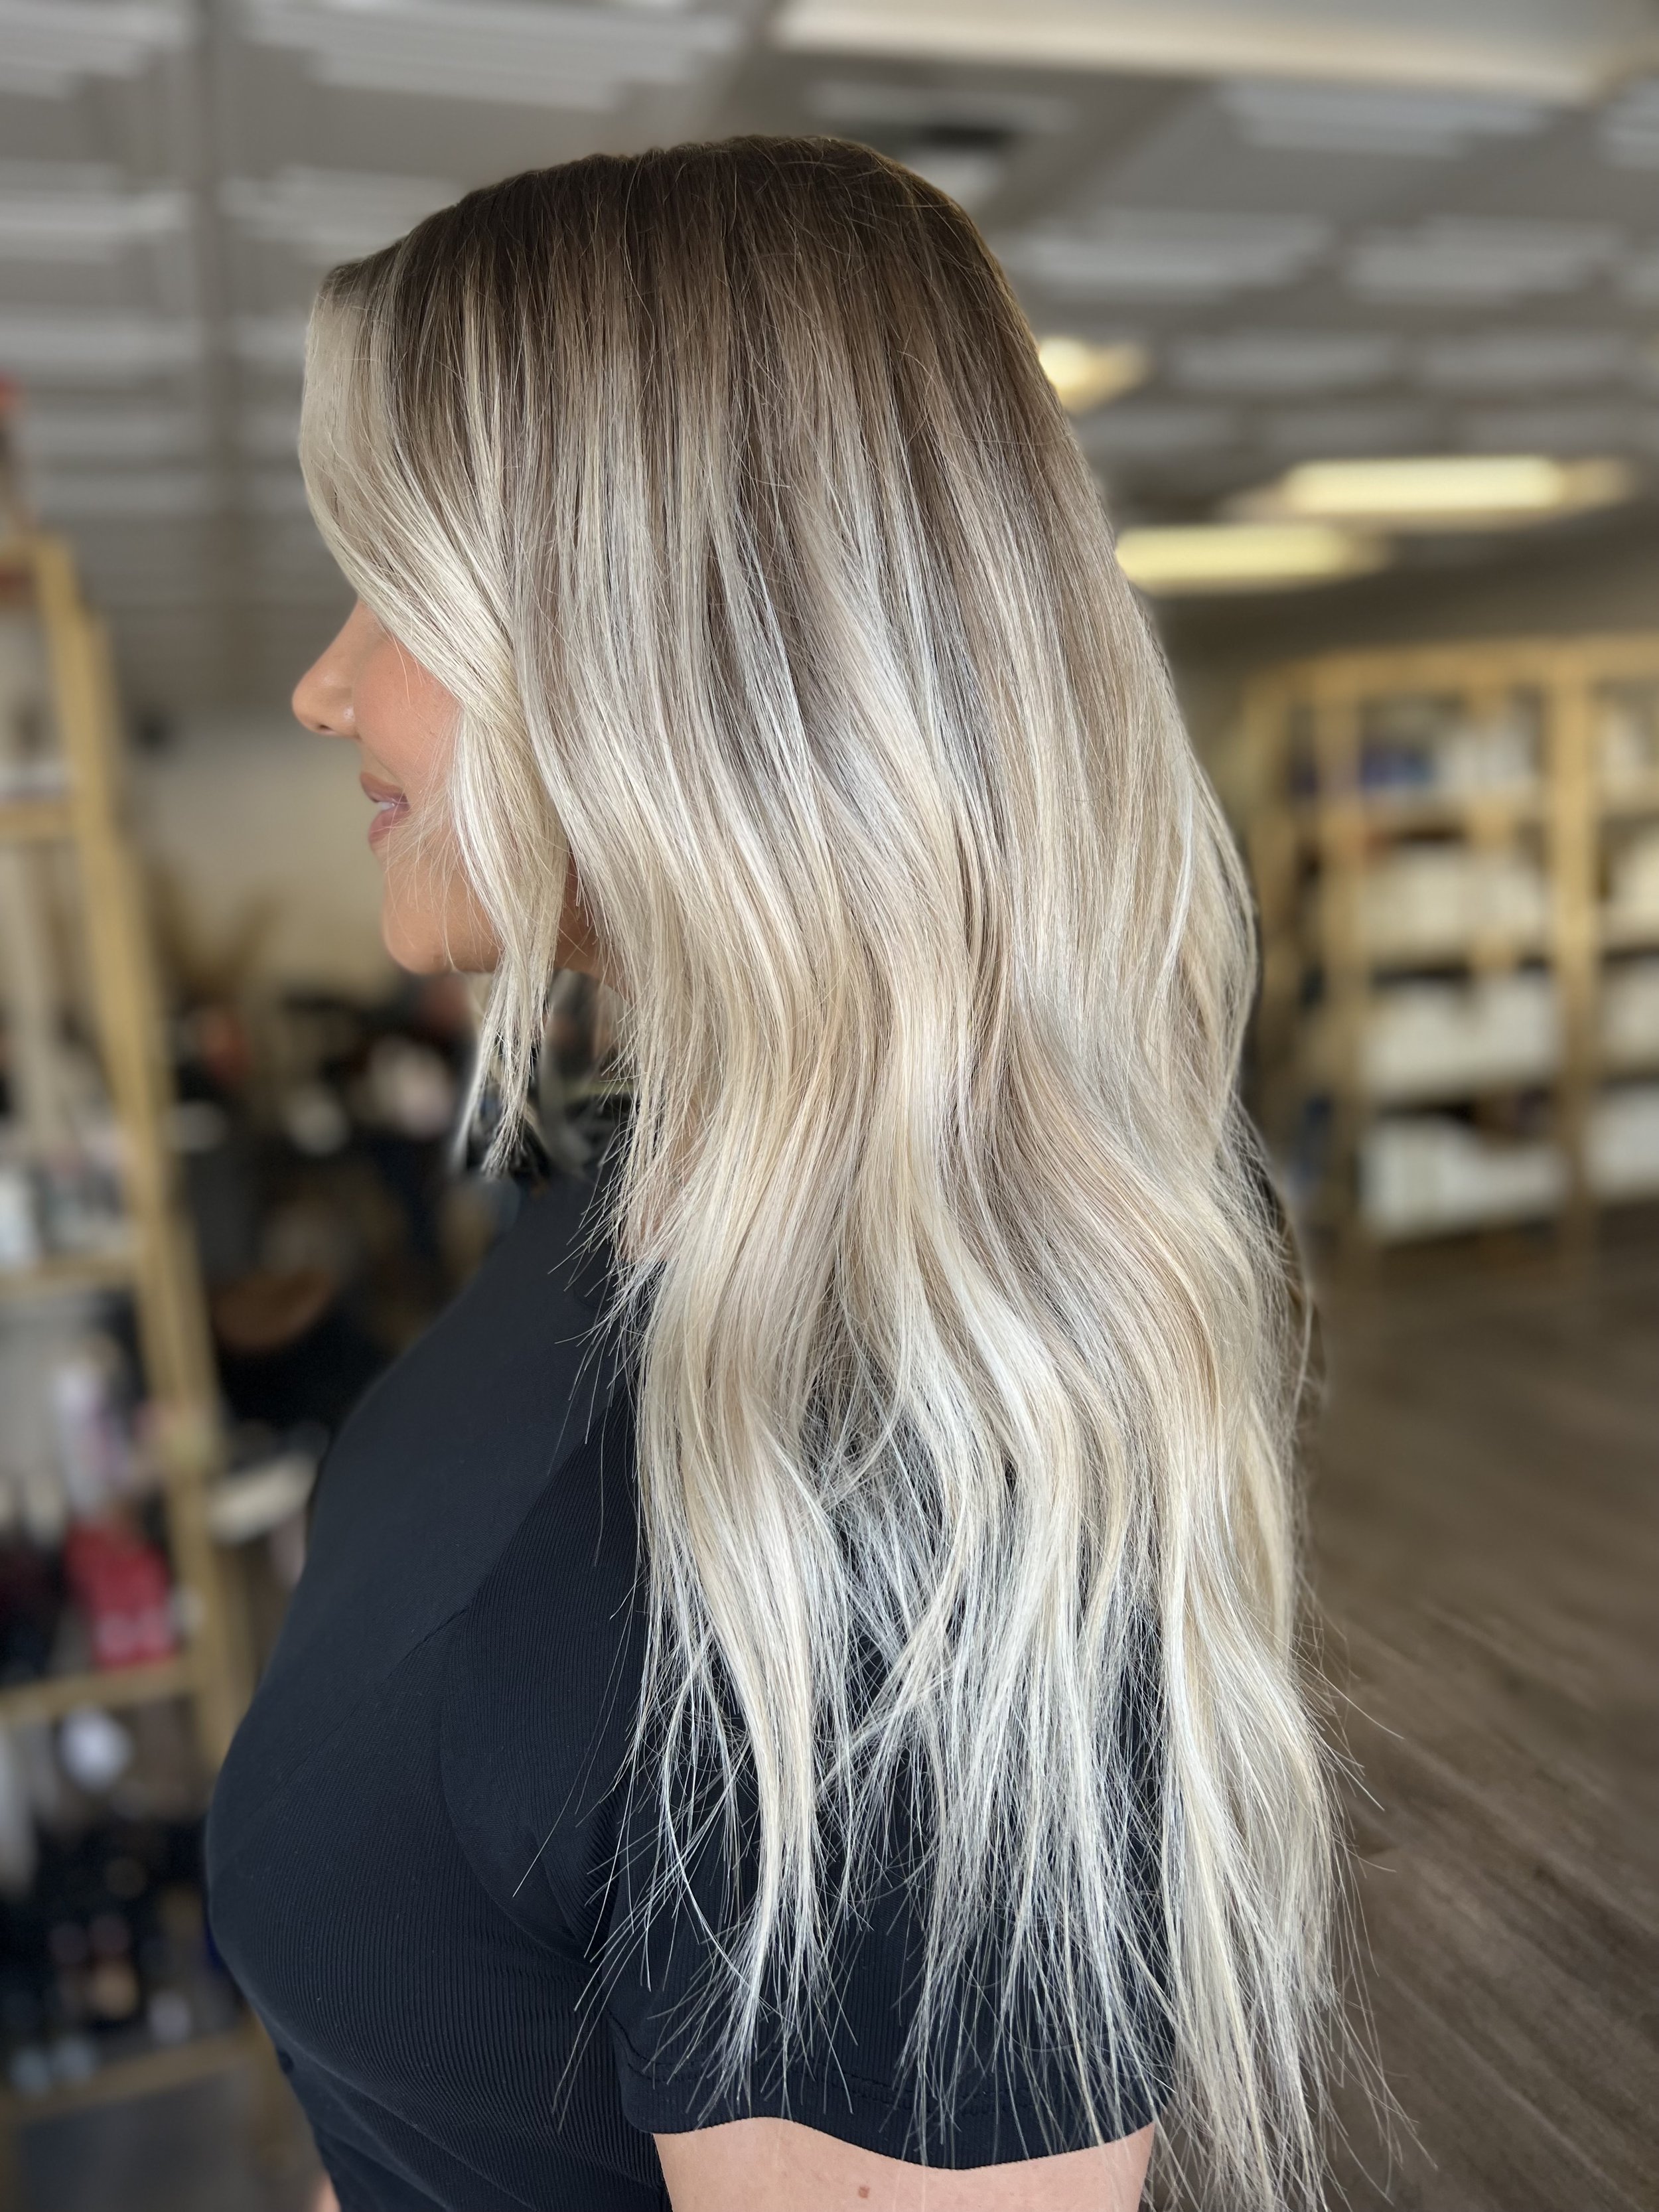 Bre Sheppard New Hair For Fall - Bright Blonde Rooted Natural Fall Hair.jpg